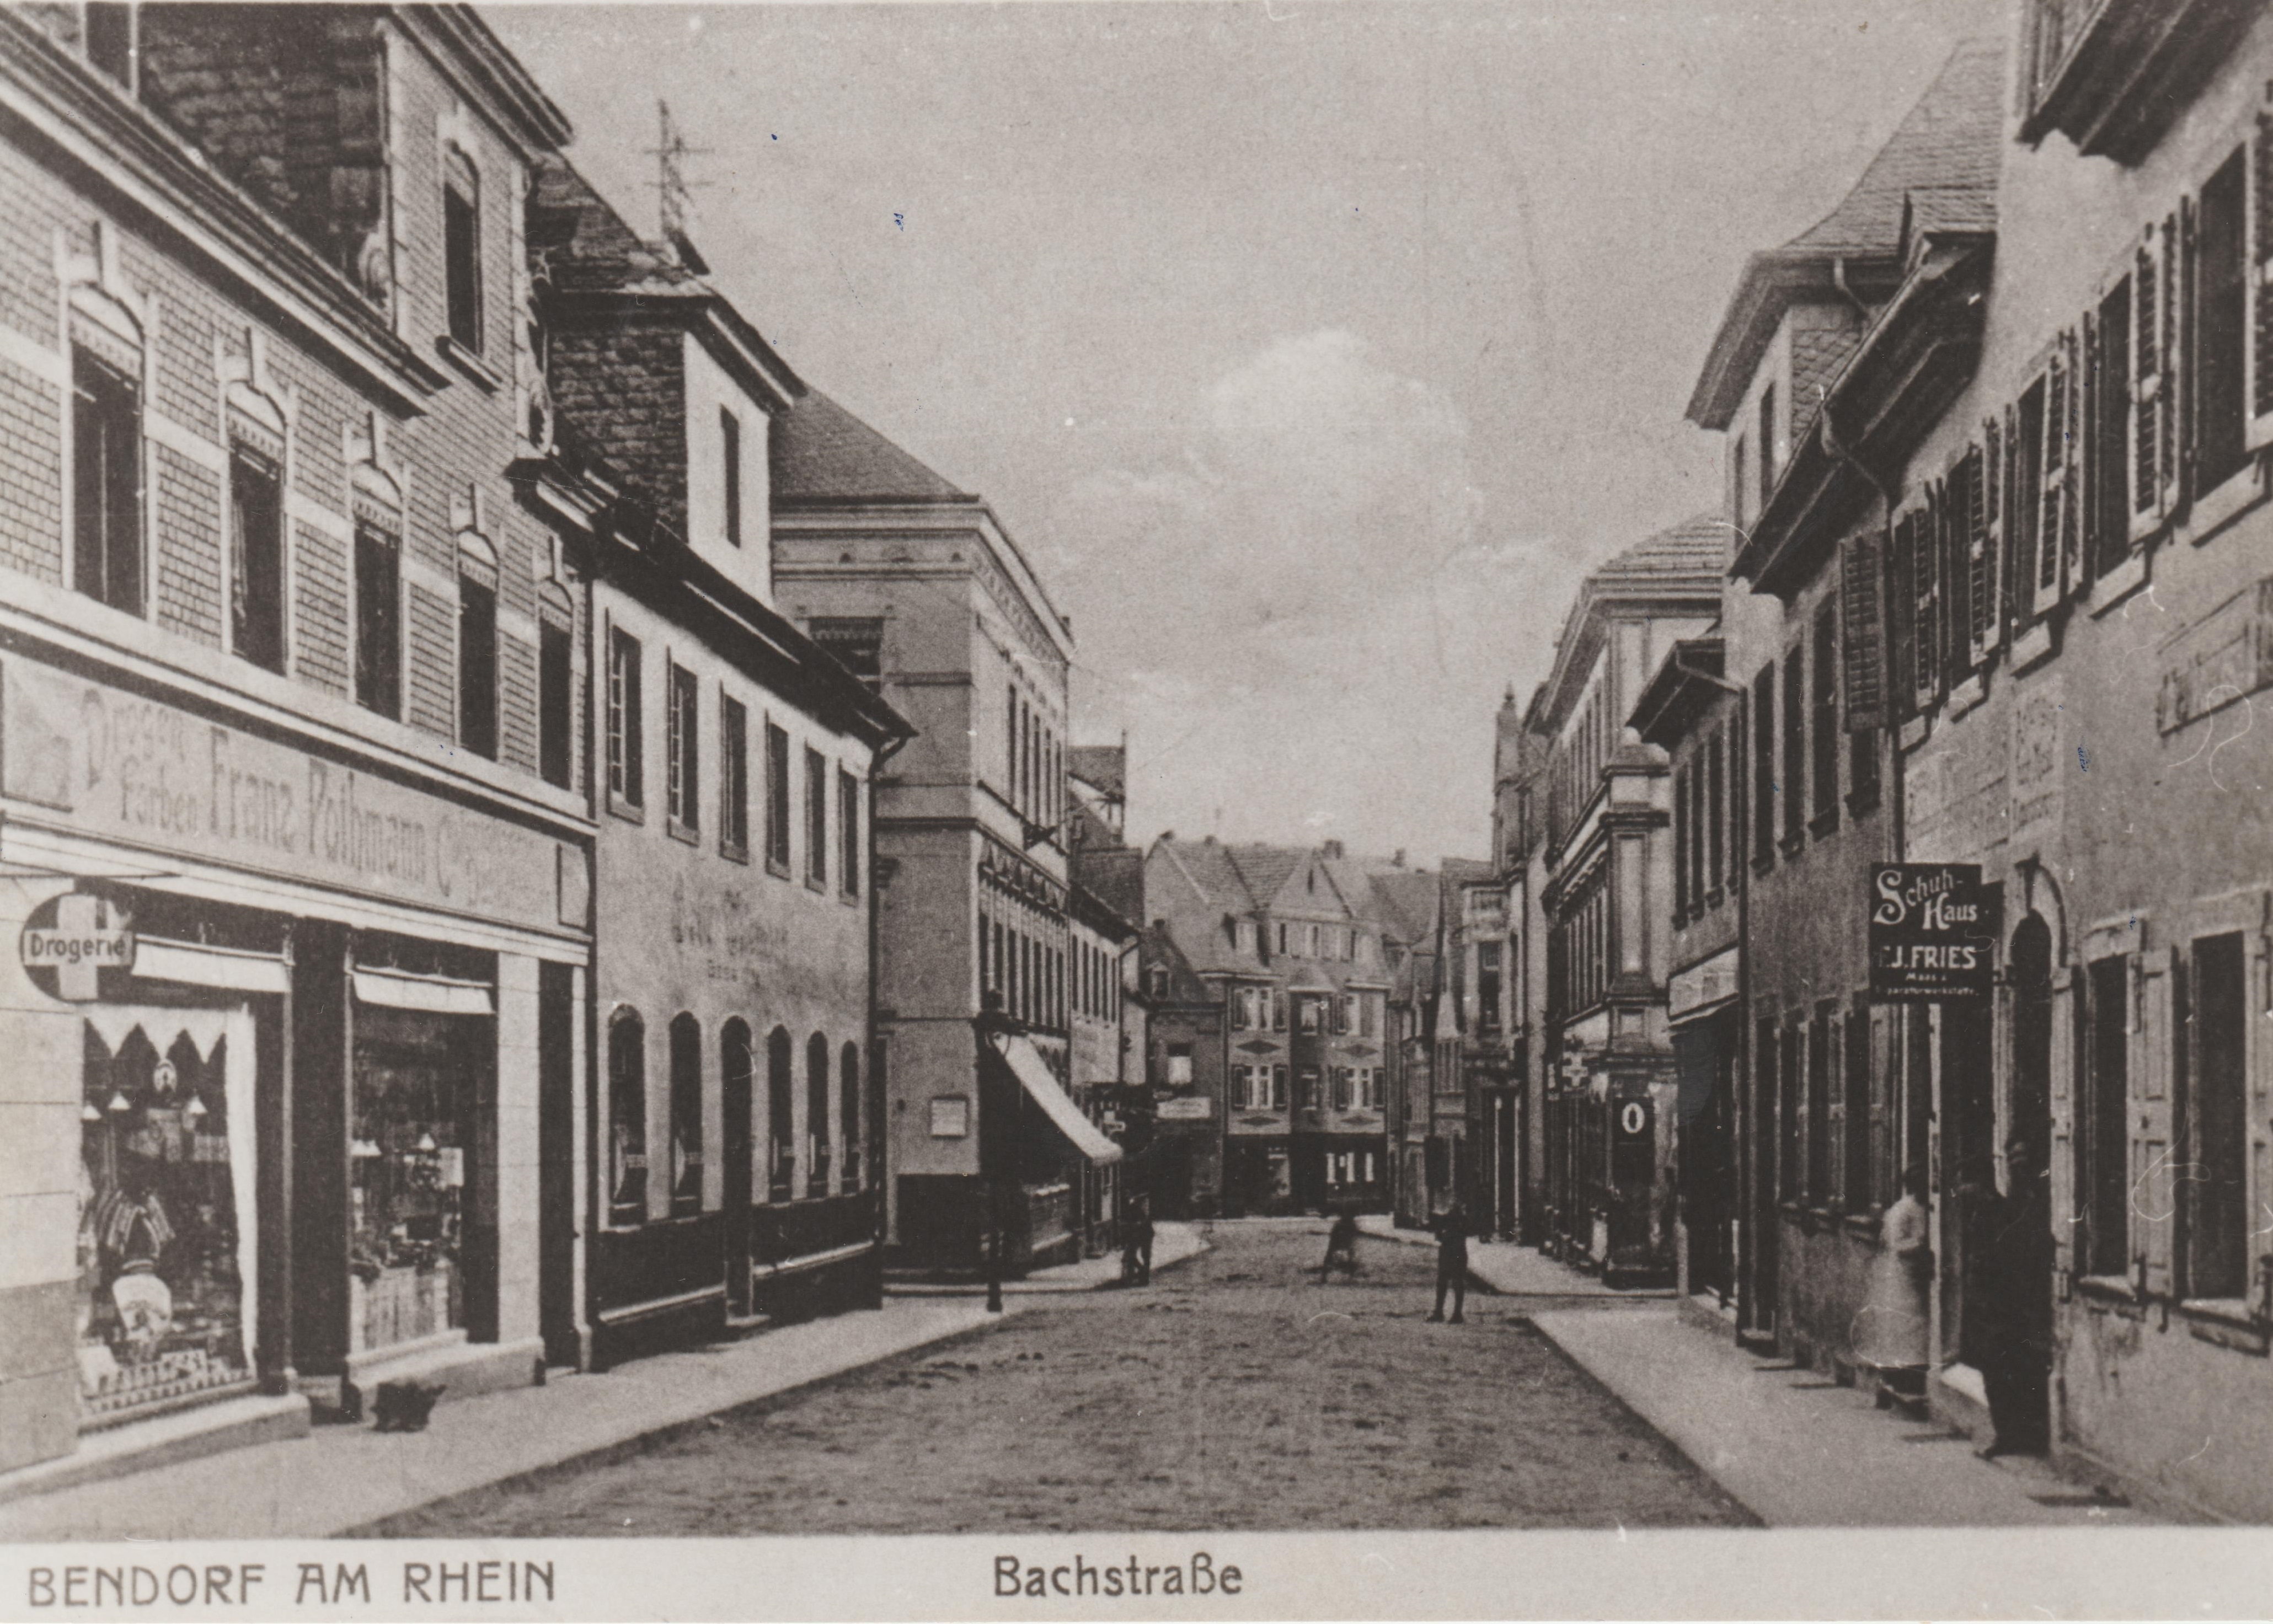 Bachstrasse in Bendorf 1927/28 (REM CC BY-NC-SA)